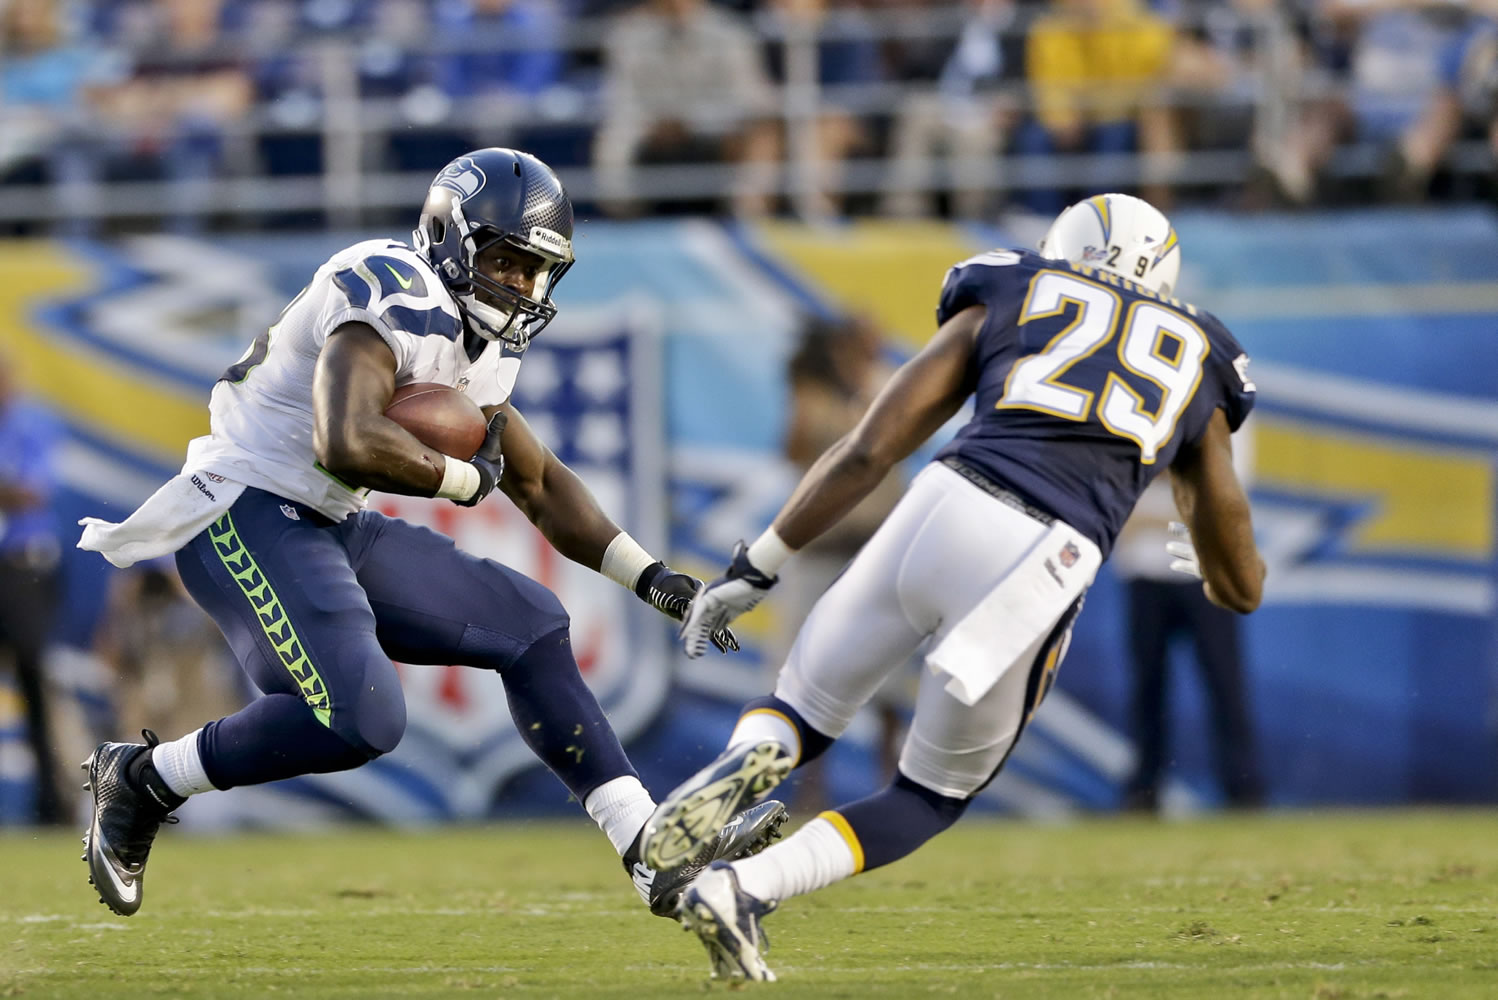 Seattle Seahawks running back Christine Michael puts a move on San Diego Chargers defensive back William Middleton in the second quarter on Thursday.